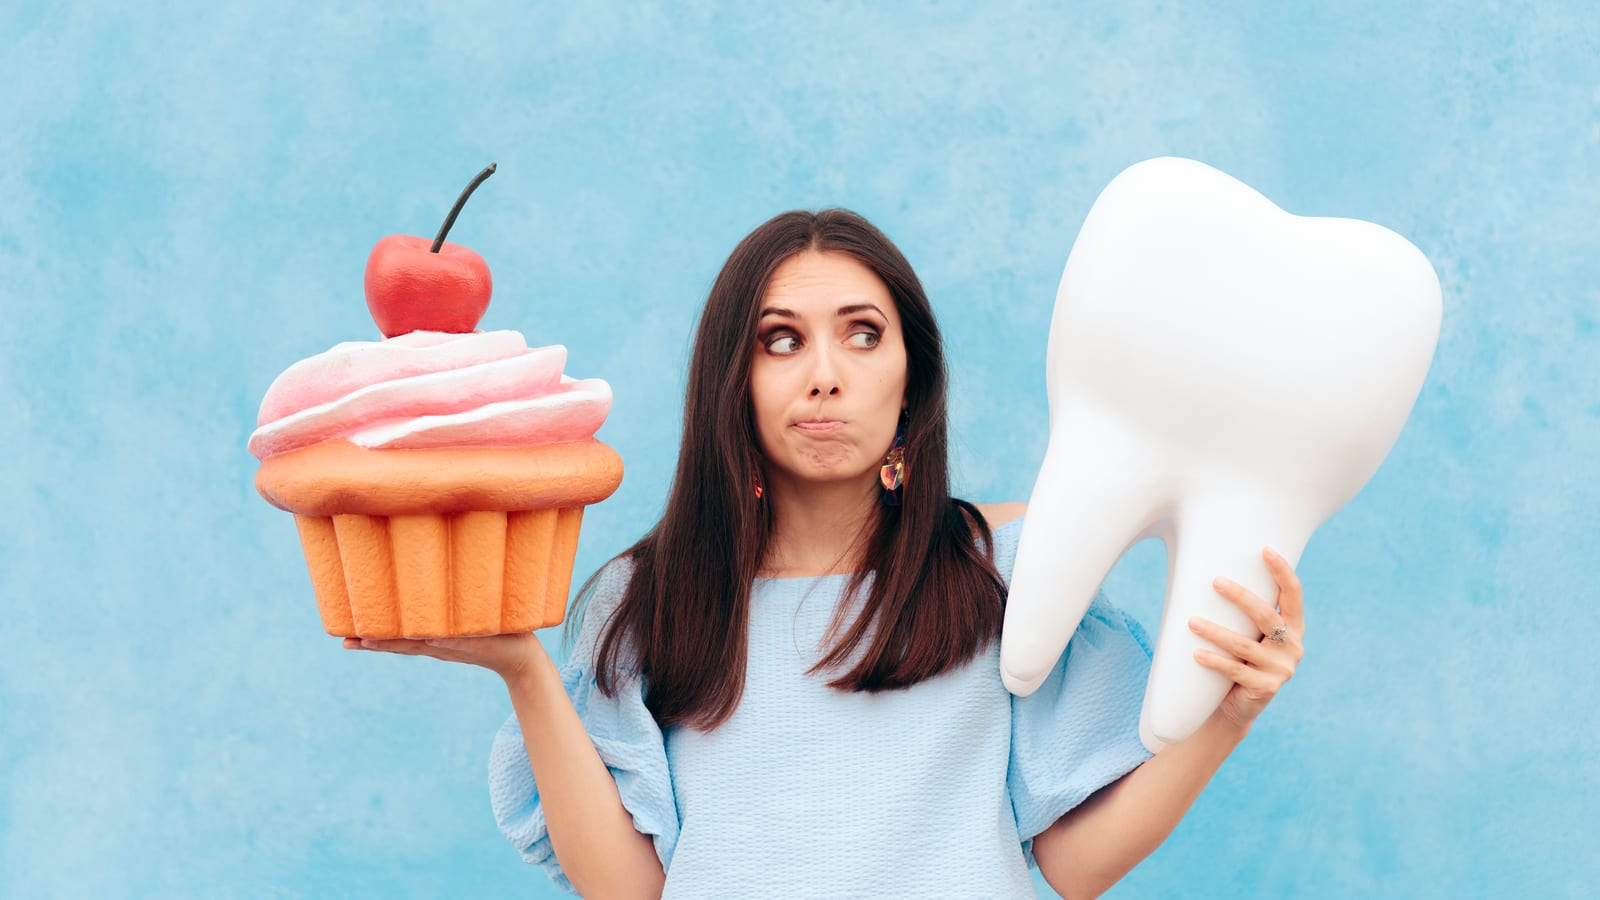 SIlly woman holding tooth and cupcake